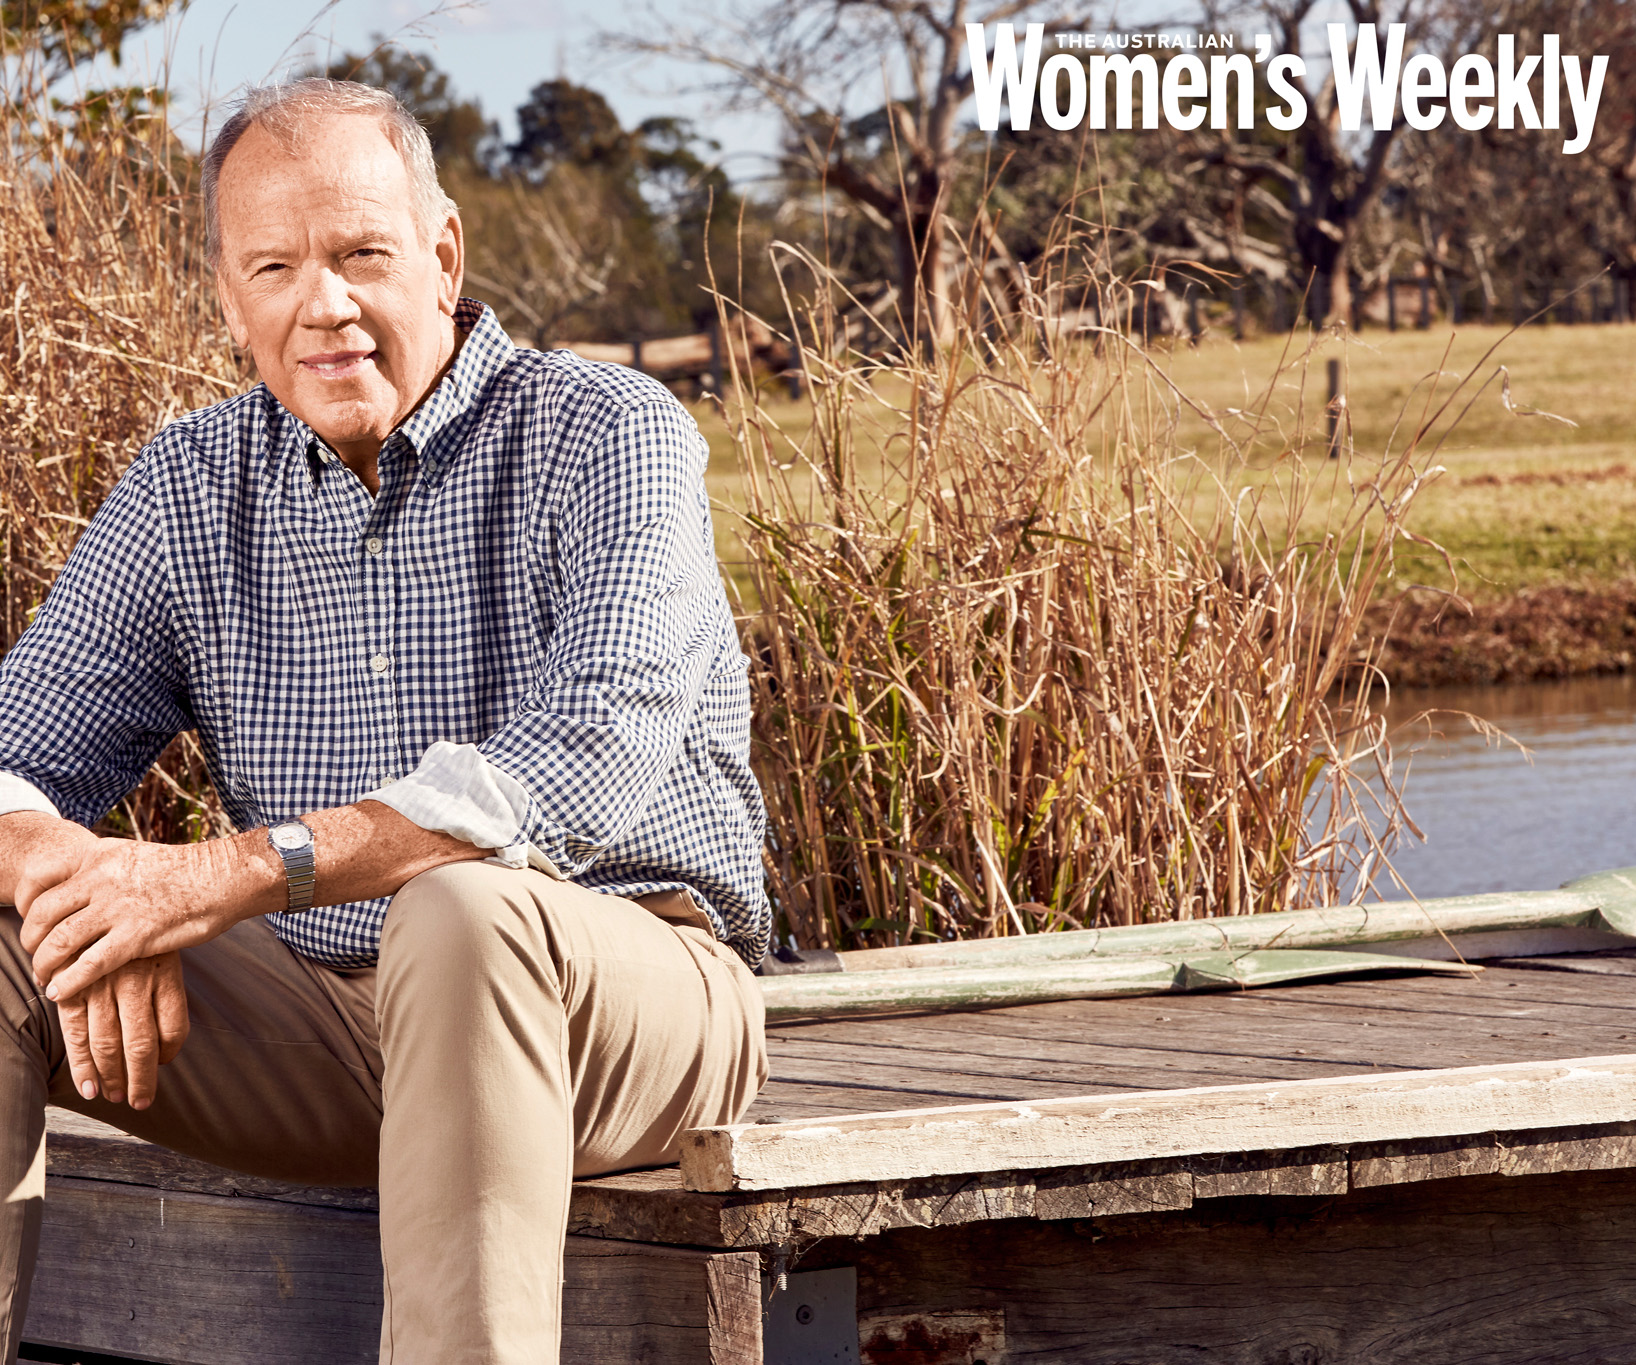 Mike Willesee on what really matters to him: “I only really care about my family and friends”